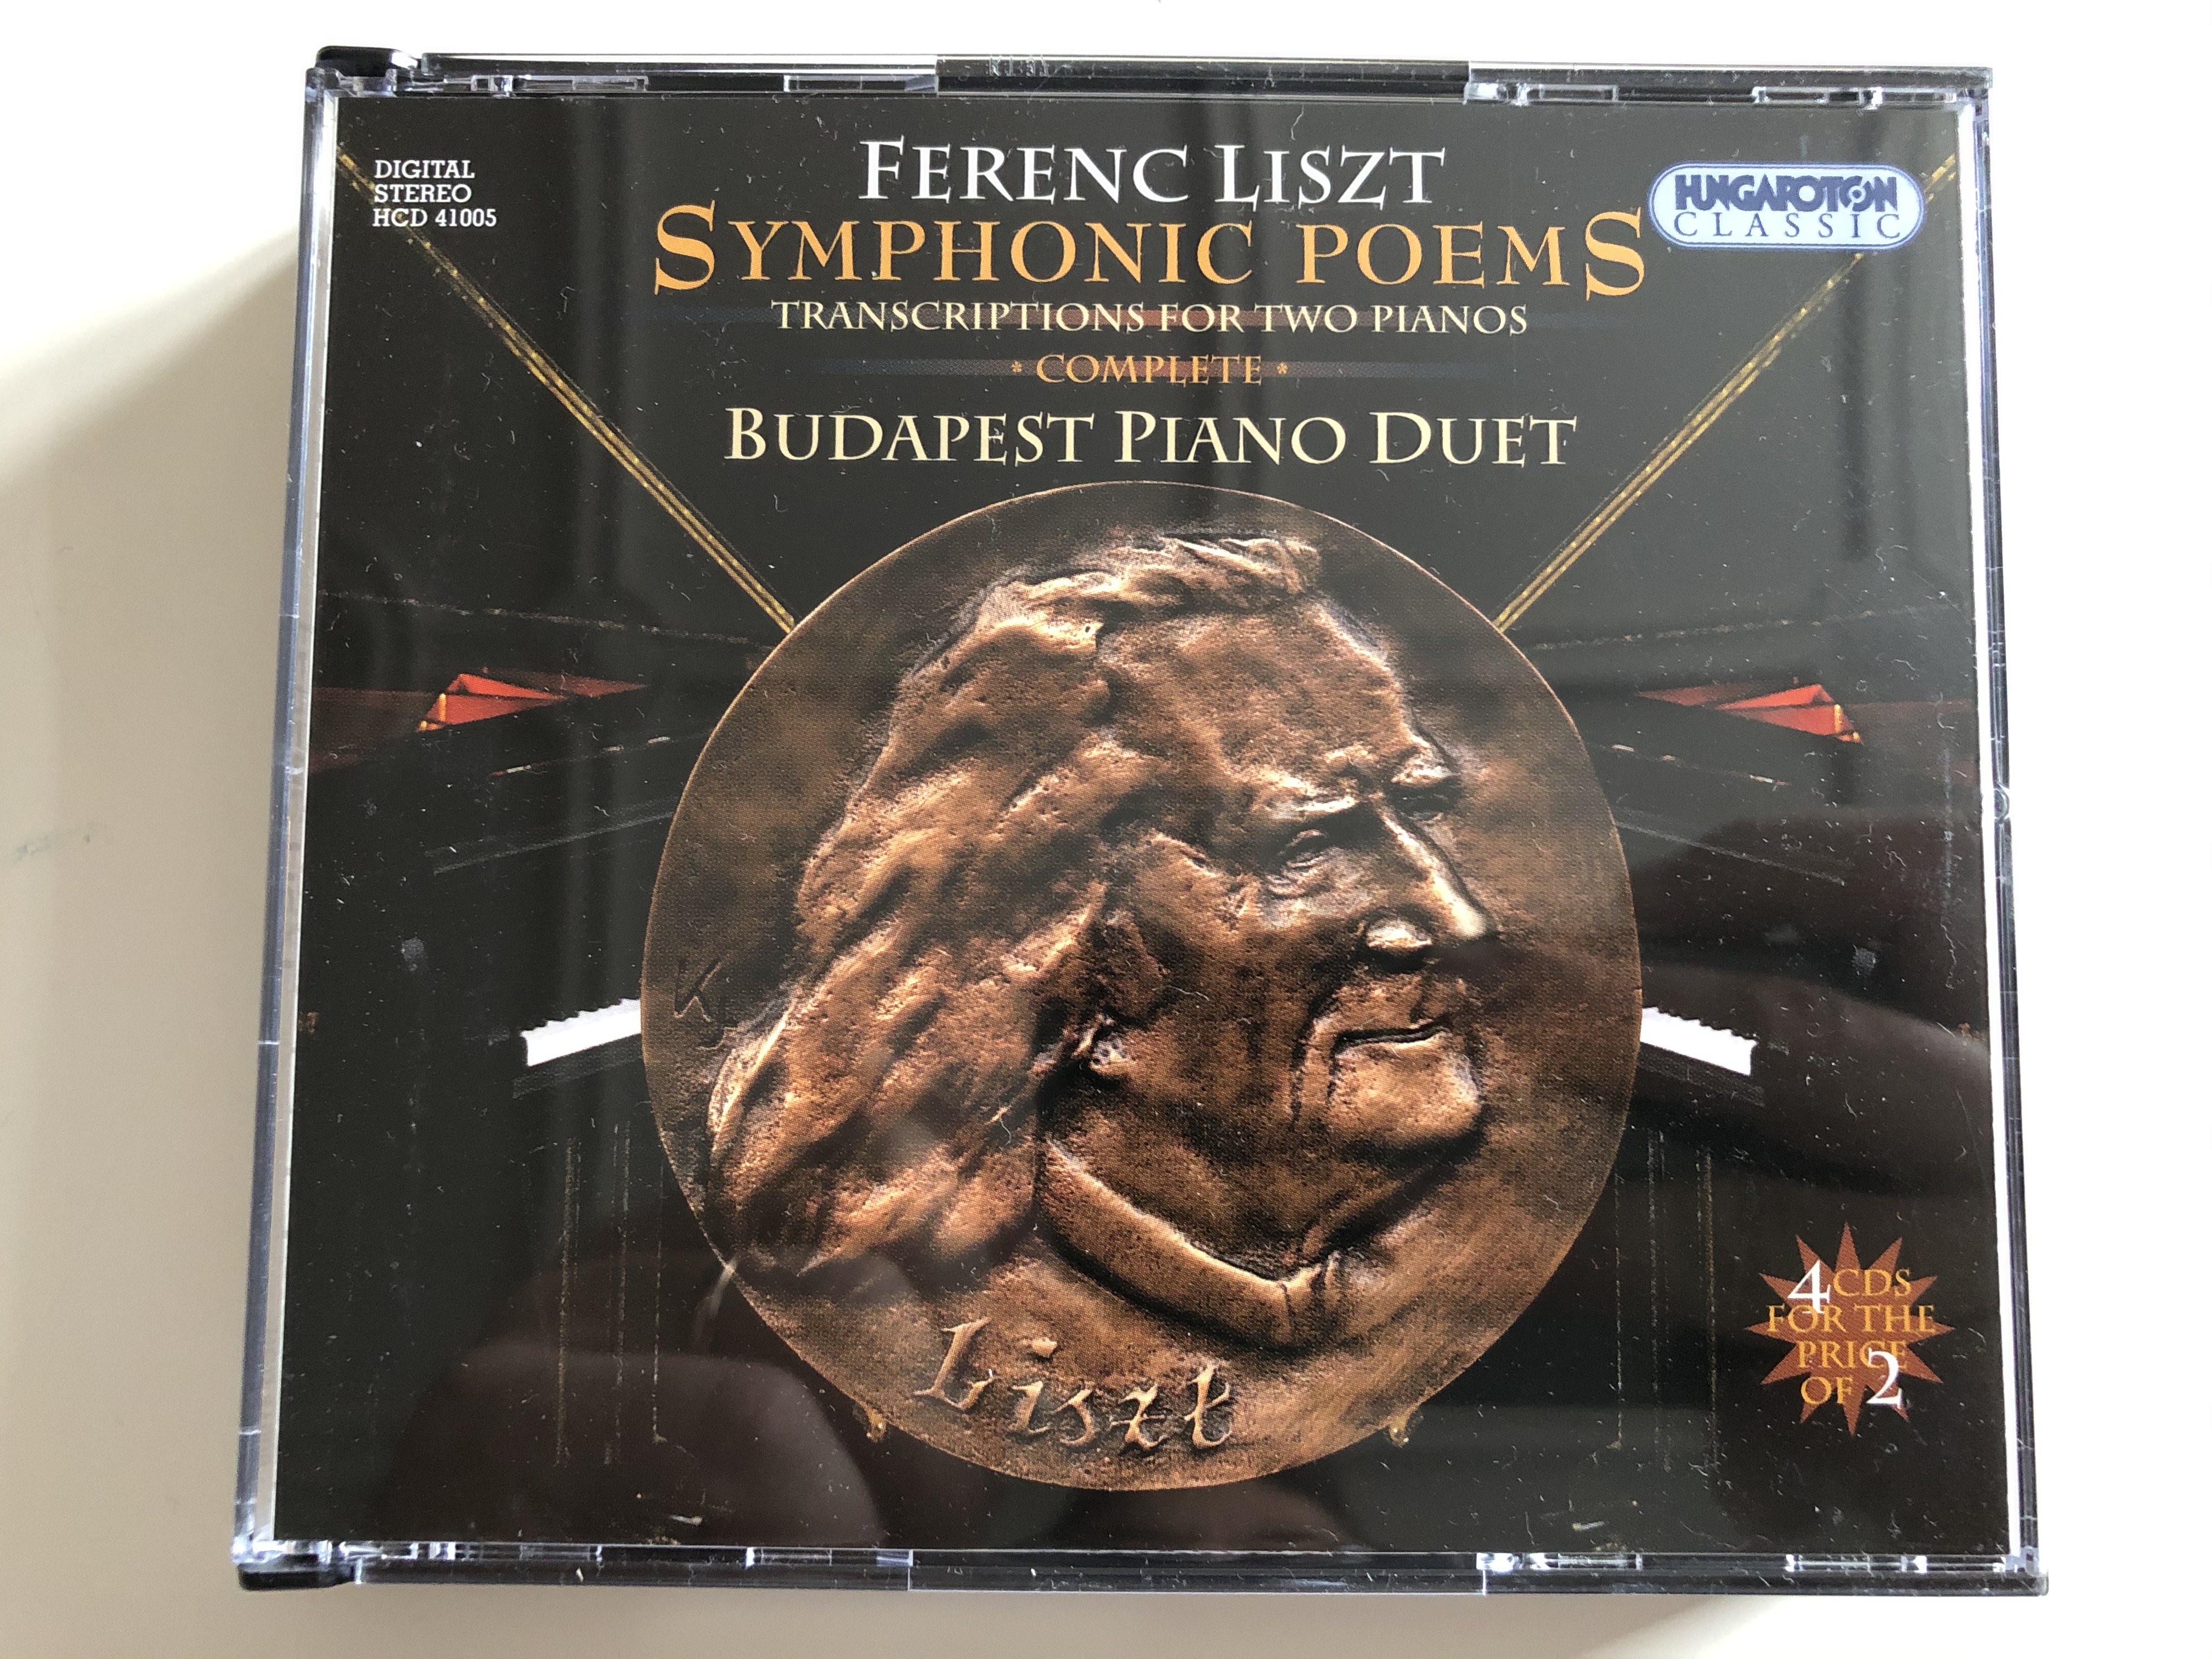 ferenc-liszt-symphonic-poems-transcriptions-for-two-pianos-complete-budapest-piano-duet-hungaroton-classic-4x-audio-cd-2003-stereo-hcd-41005-1-.jpg